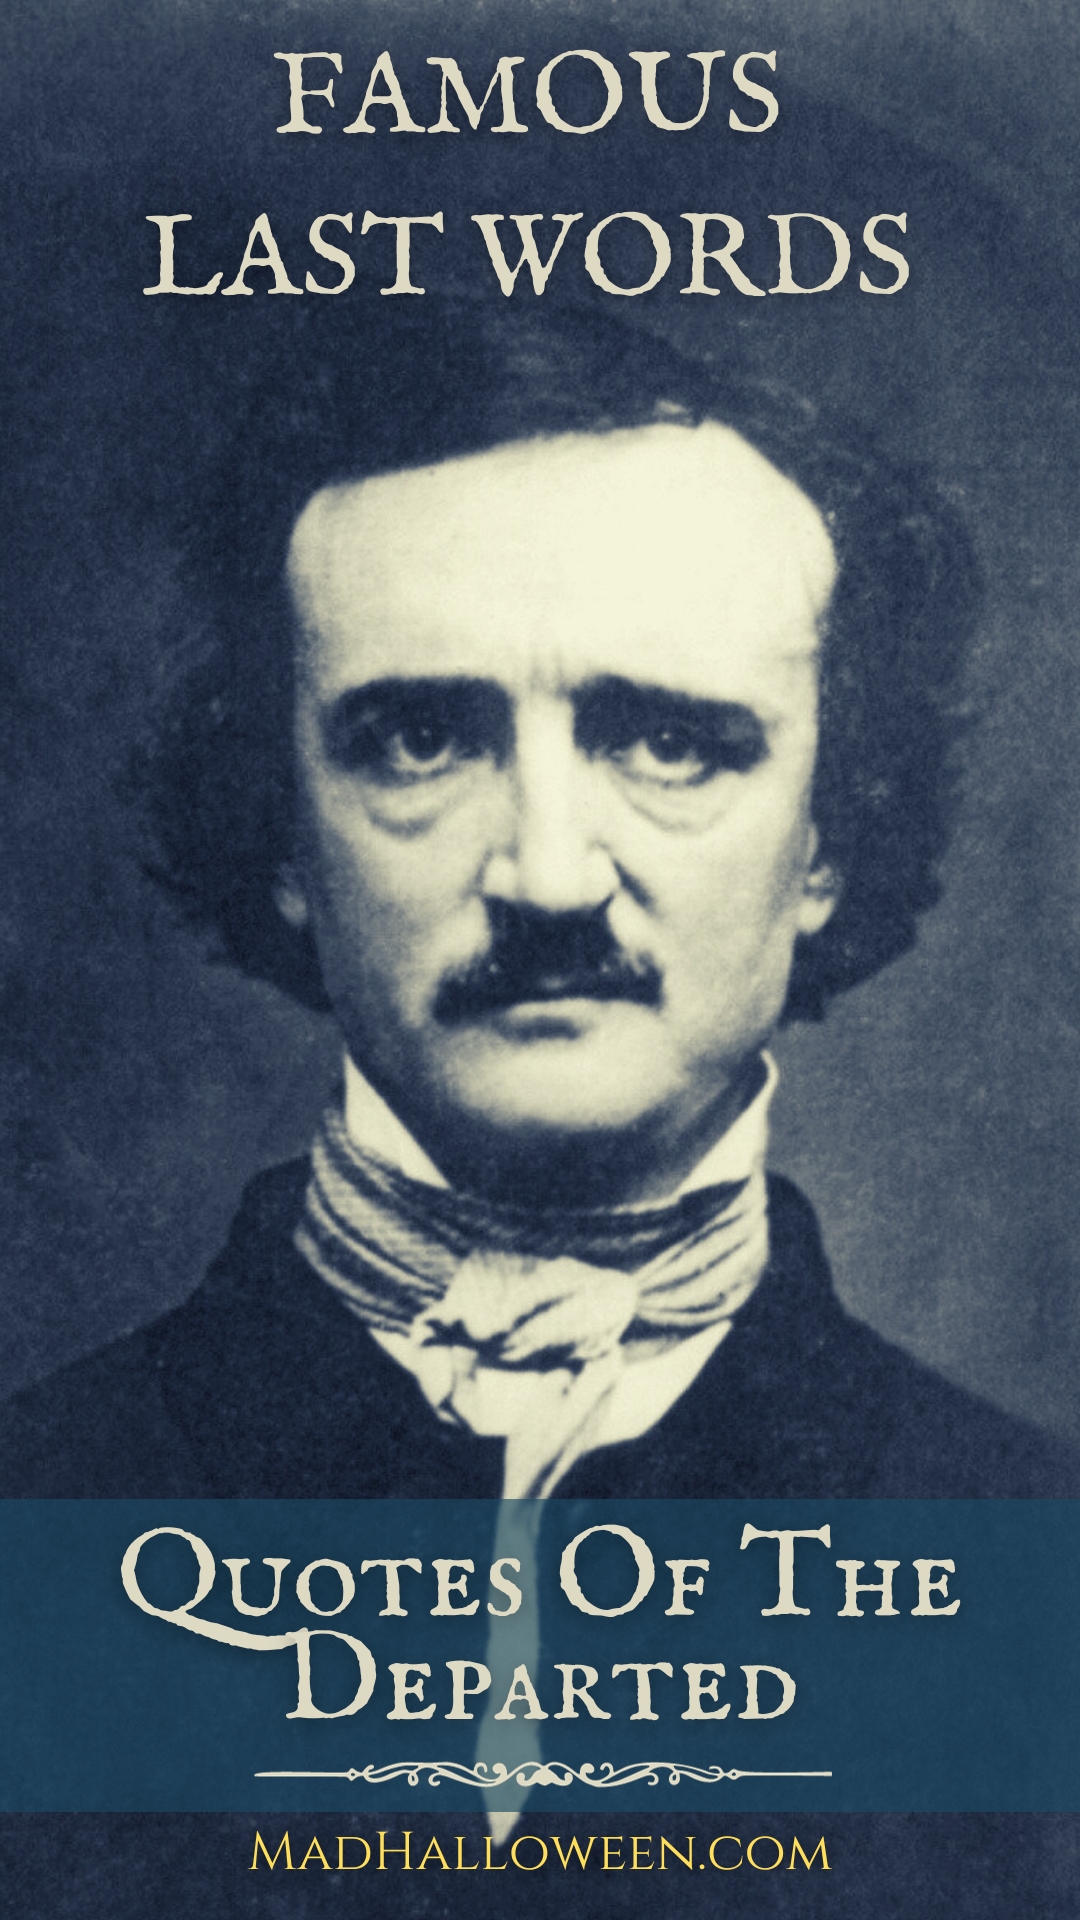 Famous Last Words Quotes of the Departed - Mad Halloween - Edgar Allen Poe